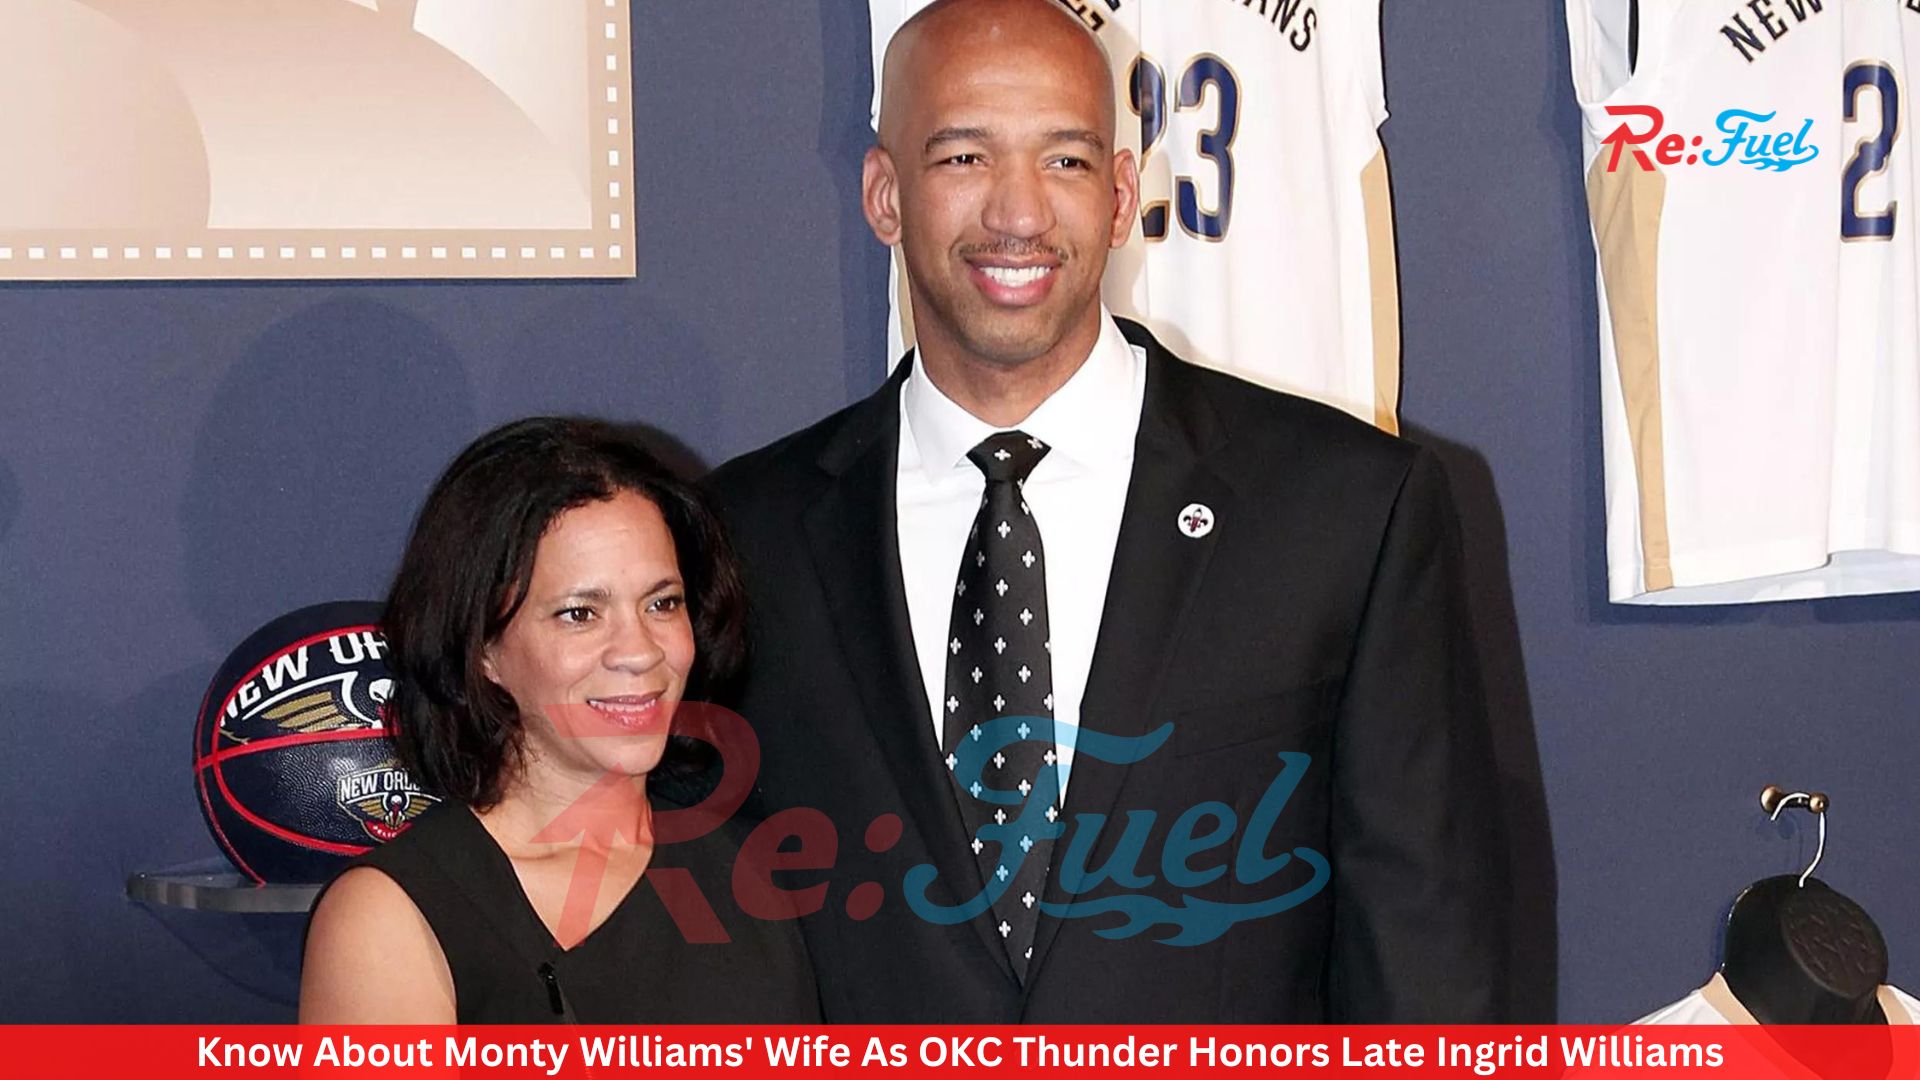 Know About Monty Williams' Wife As OKC Thunder Honors Late Ingrid Williams